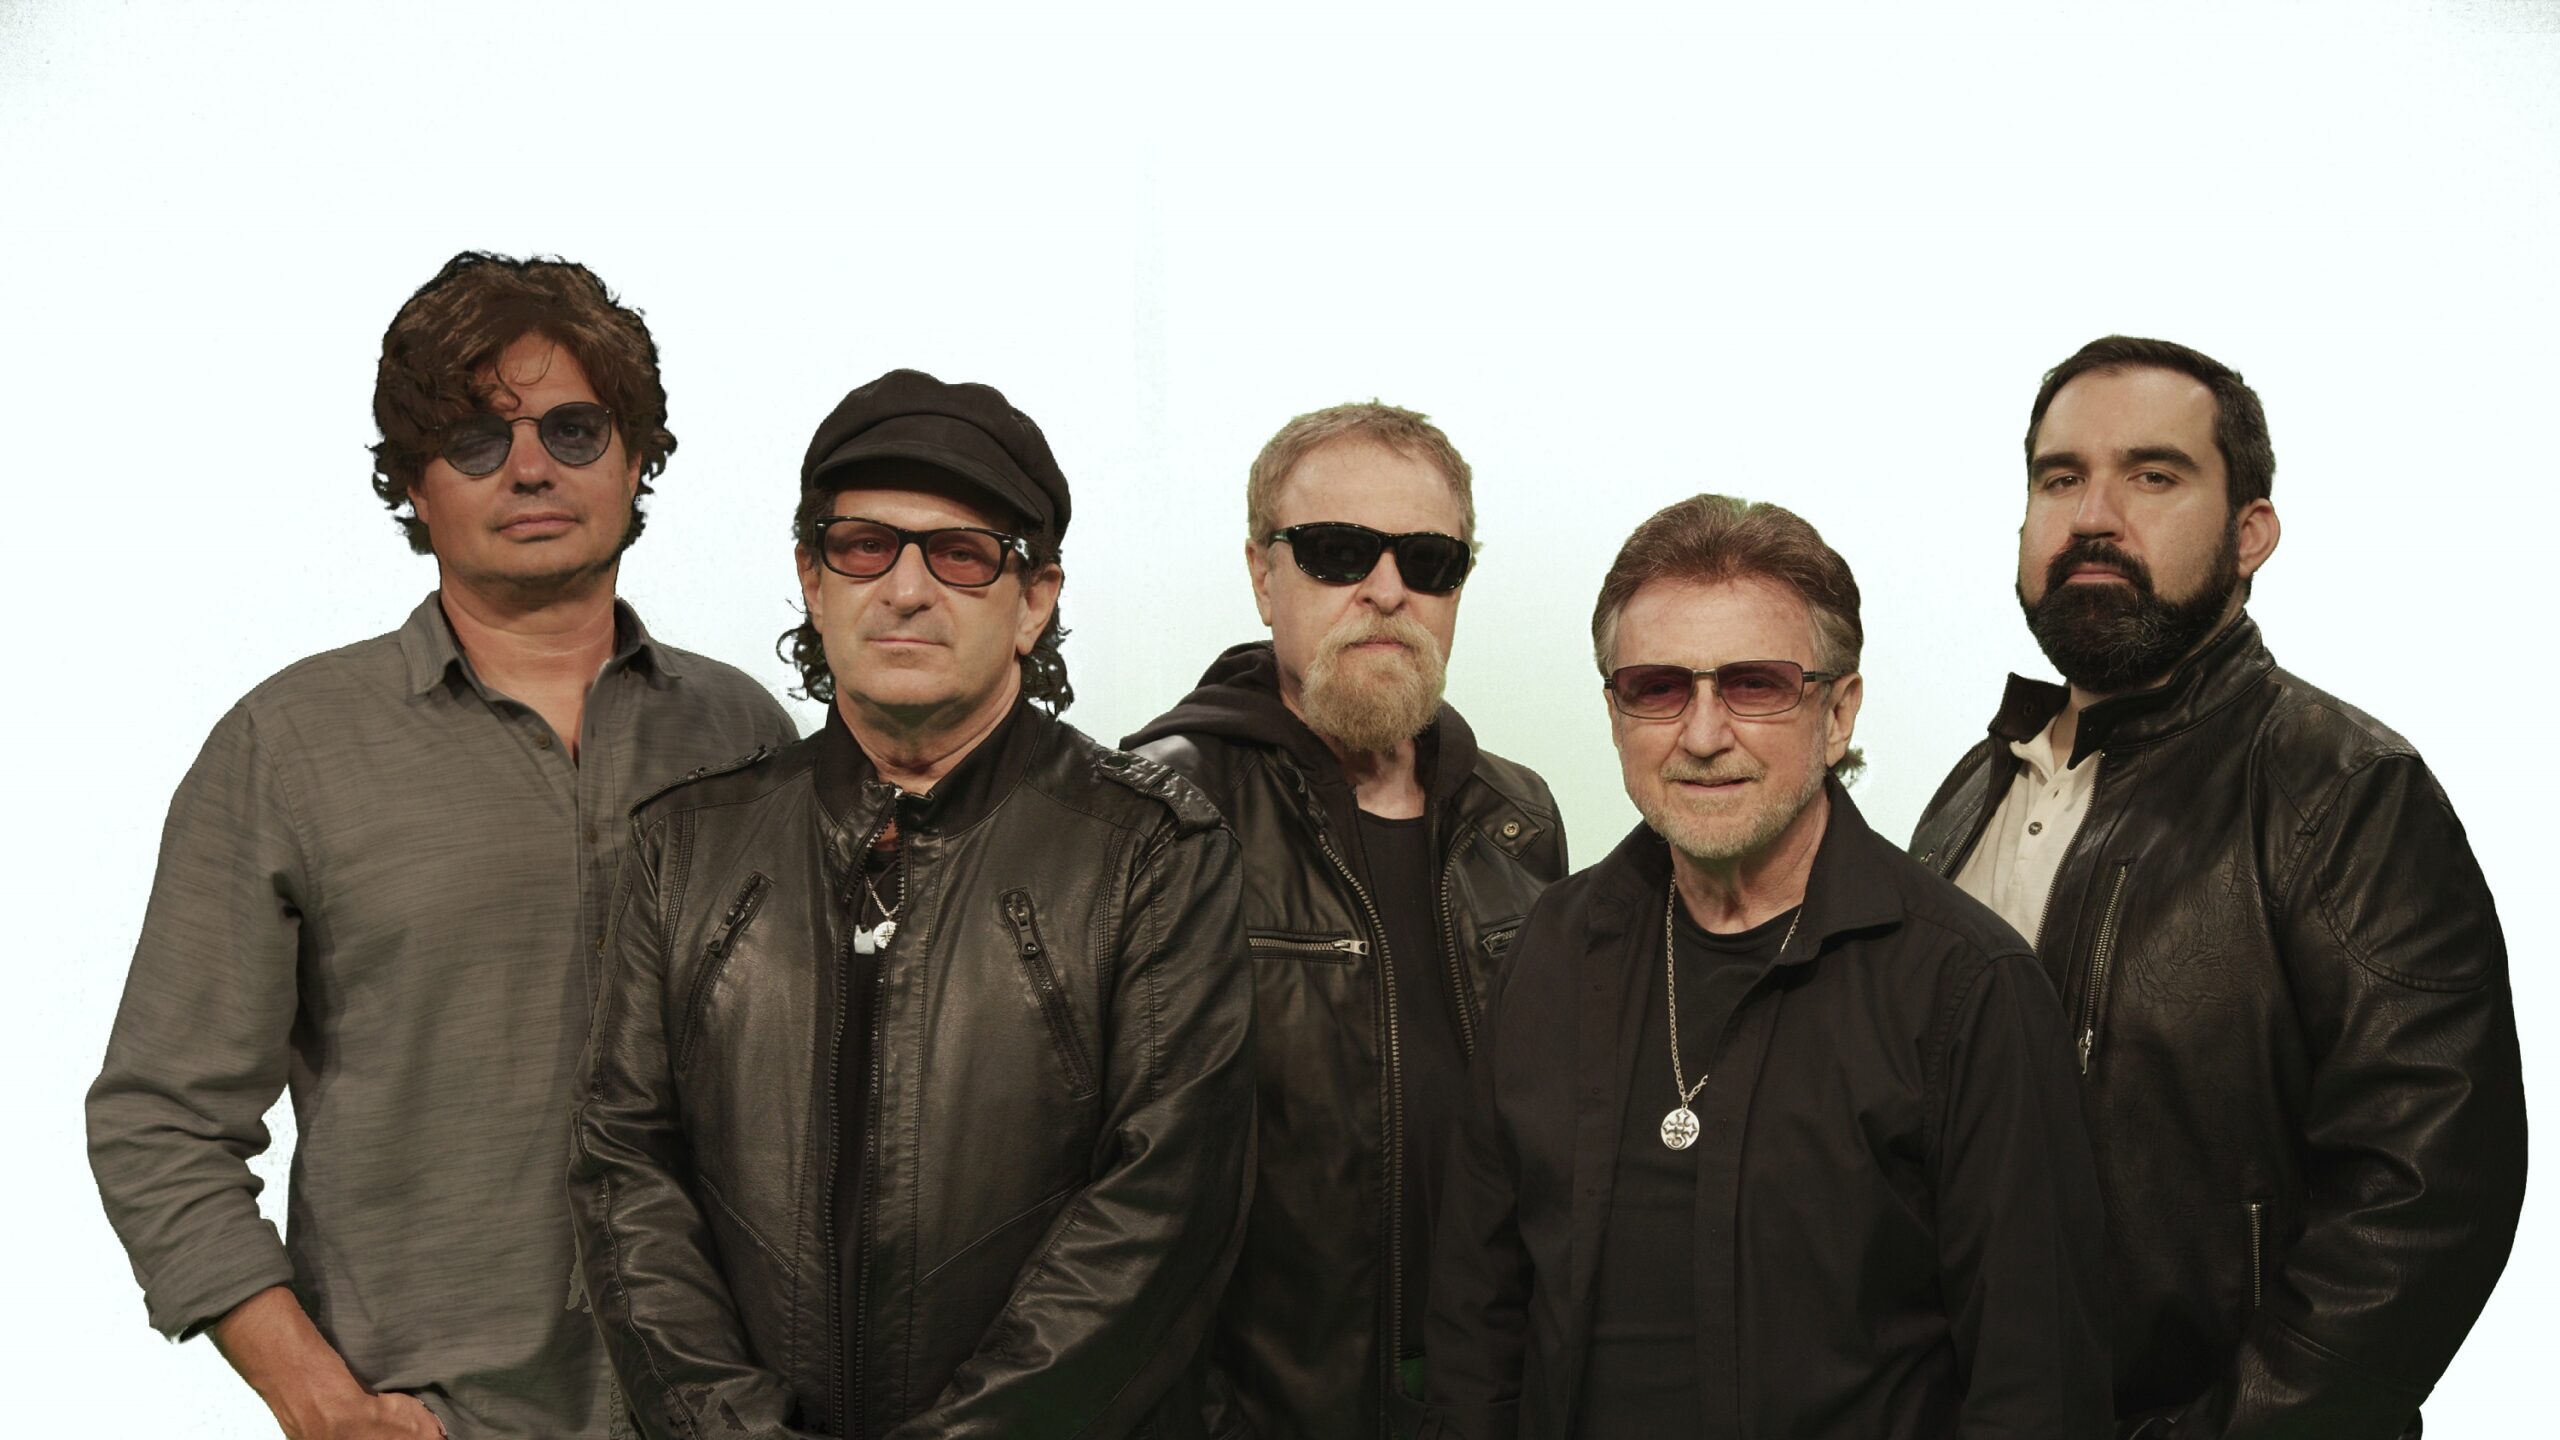 Blue oyster cult